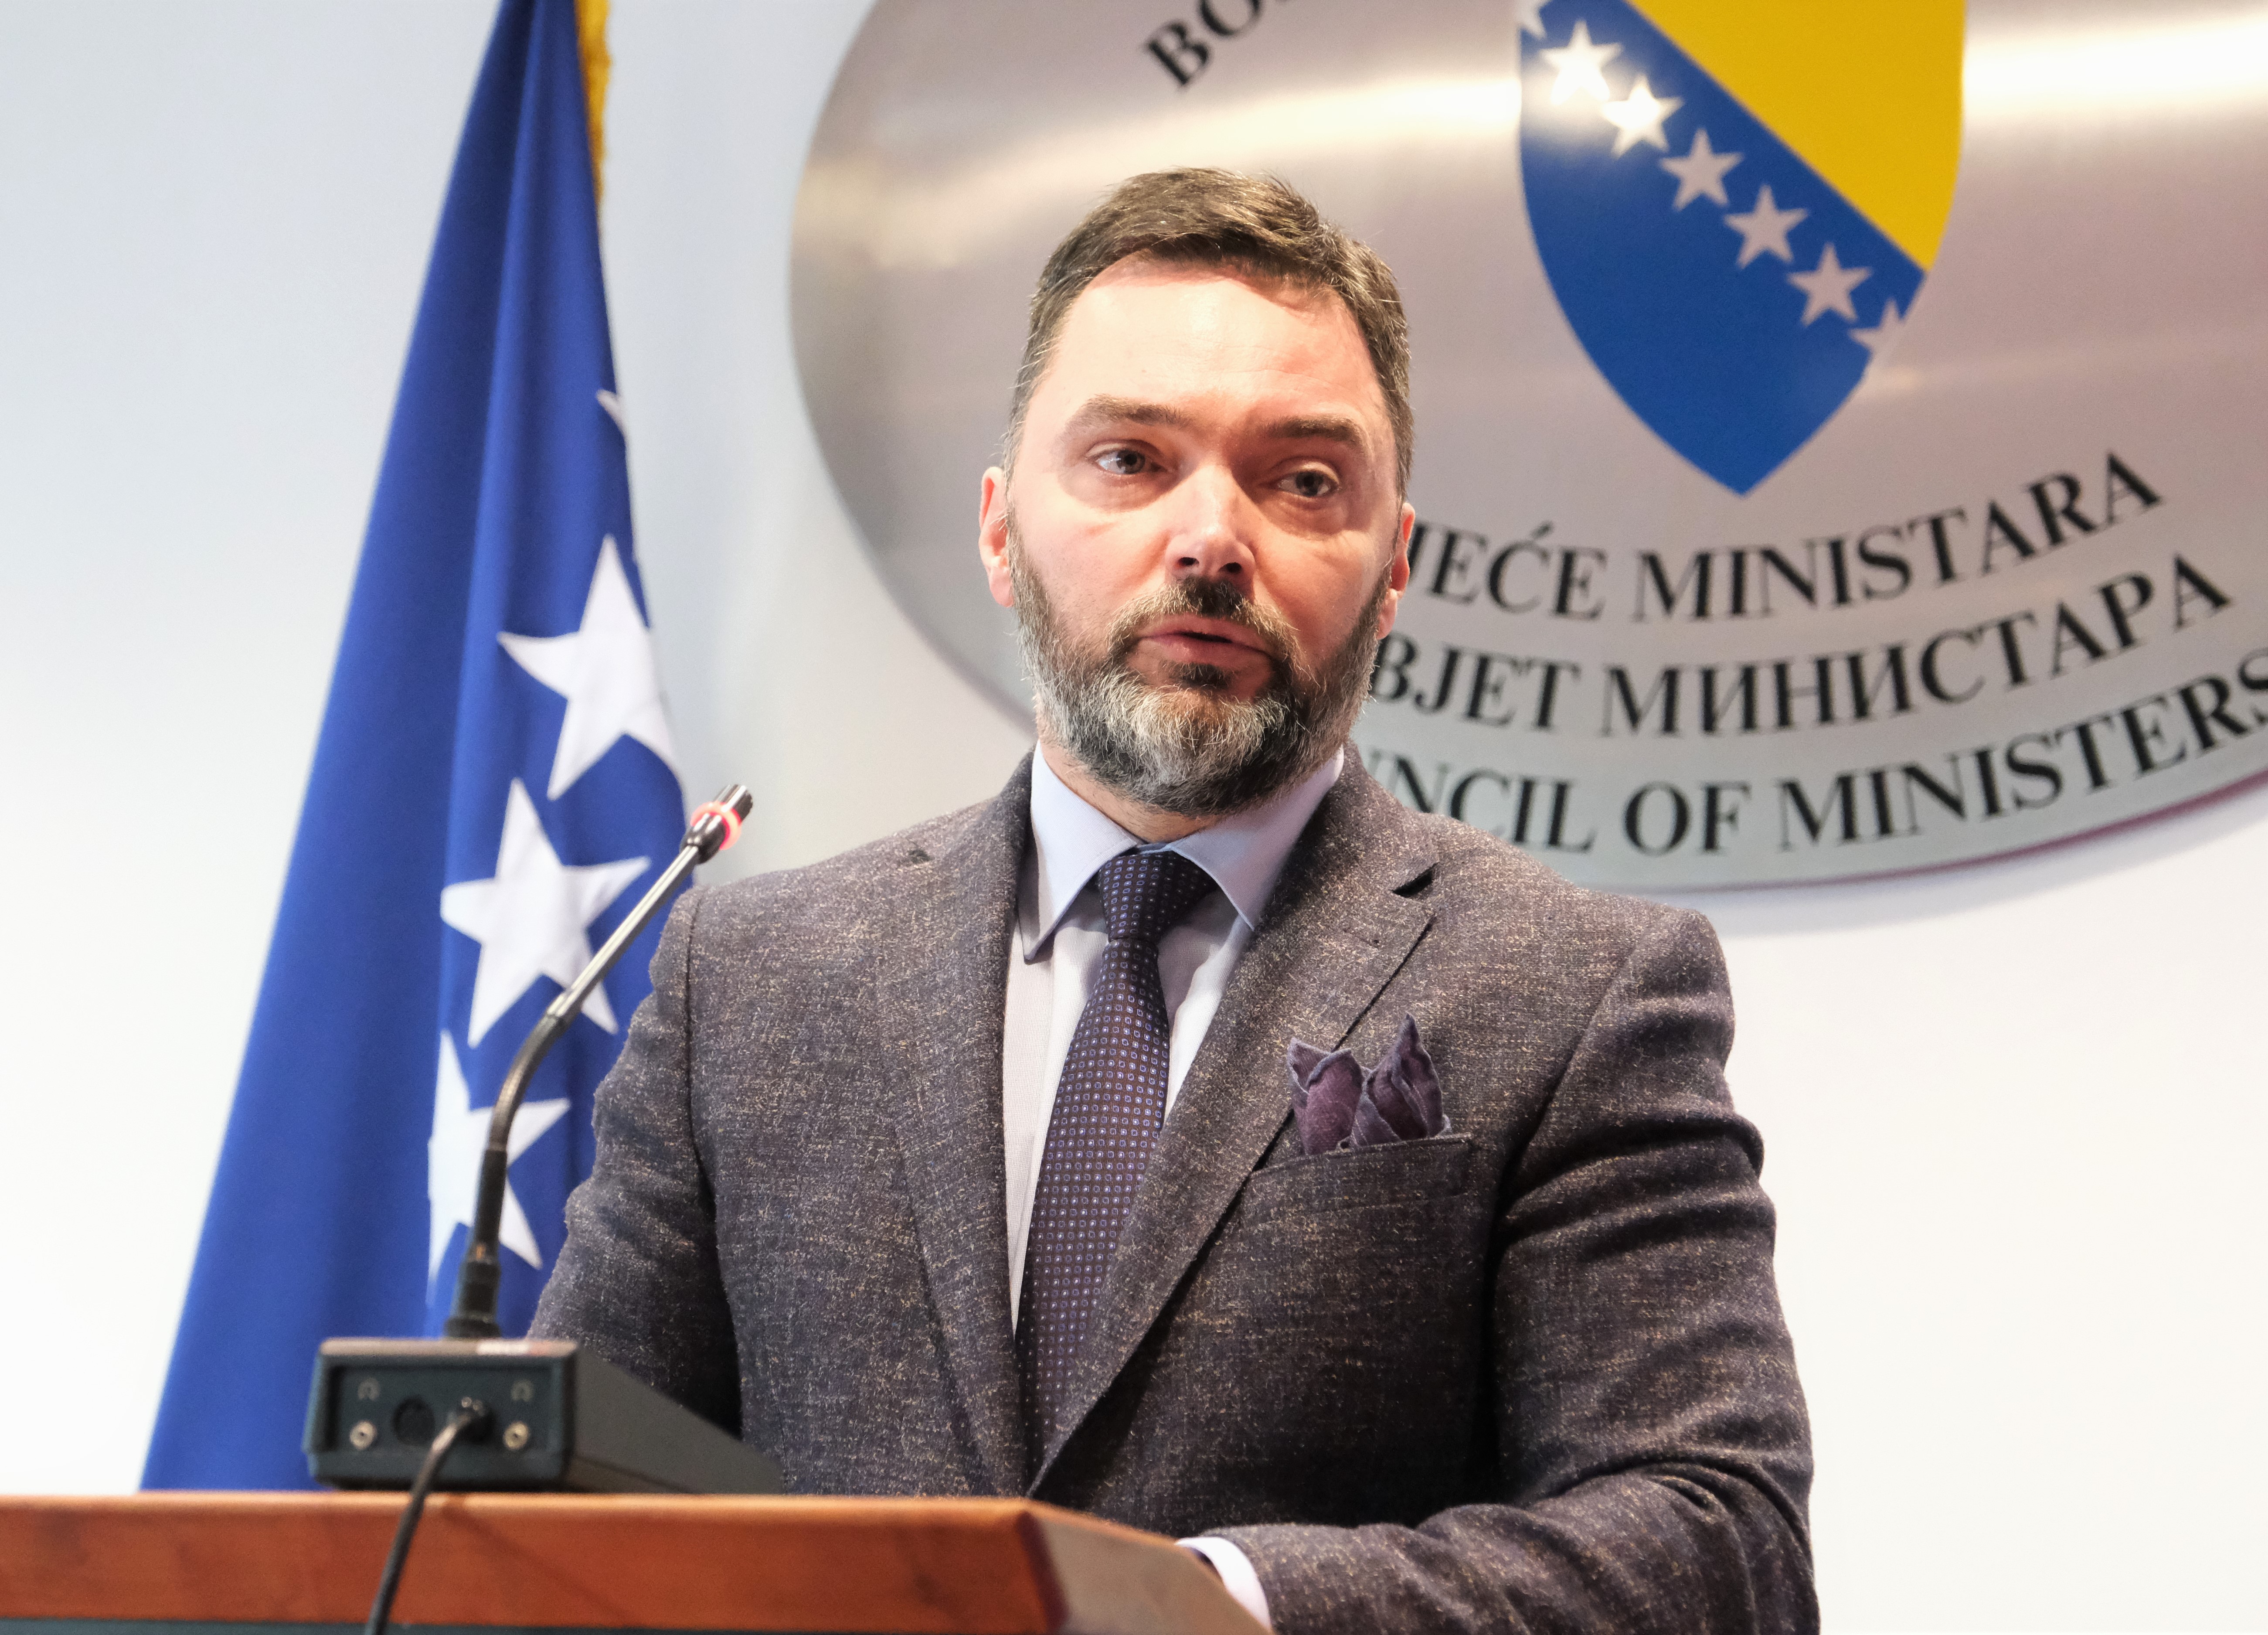 Picture for Minister Košarac: Croatia's Decision is Scandalous and Extremely Problematic, and It is Especially Worrying that is Coming at The Time of The Fight Against Coronavirus